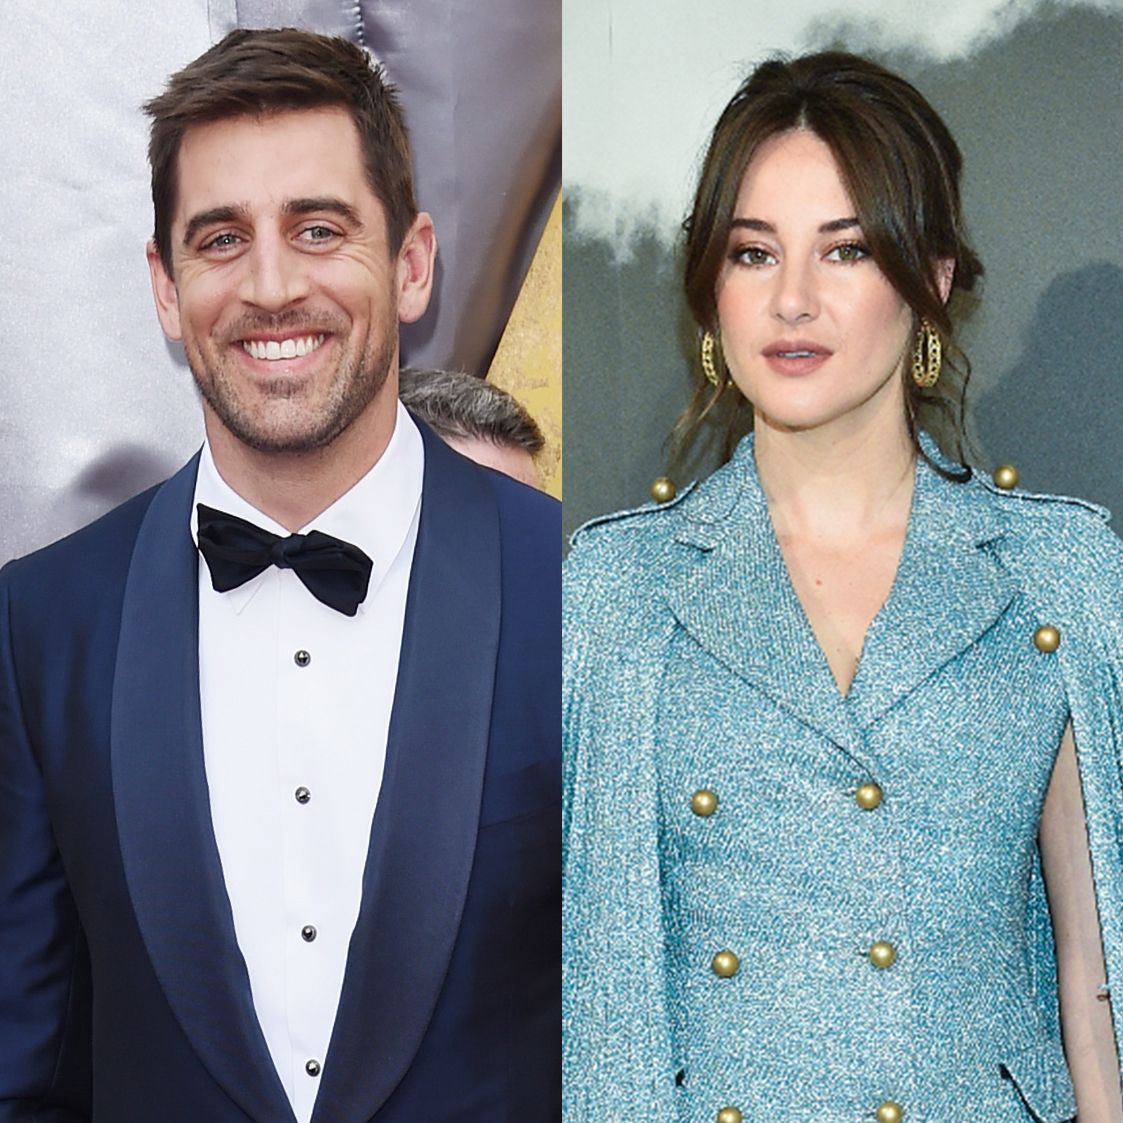 Aaron Rodgers Says He's "Engaged" Following Rumors He's Dating Shailene Woodley